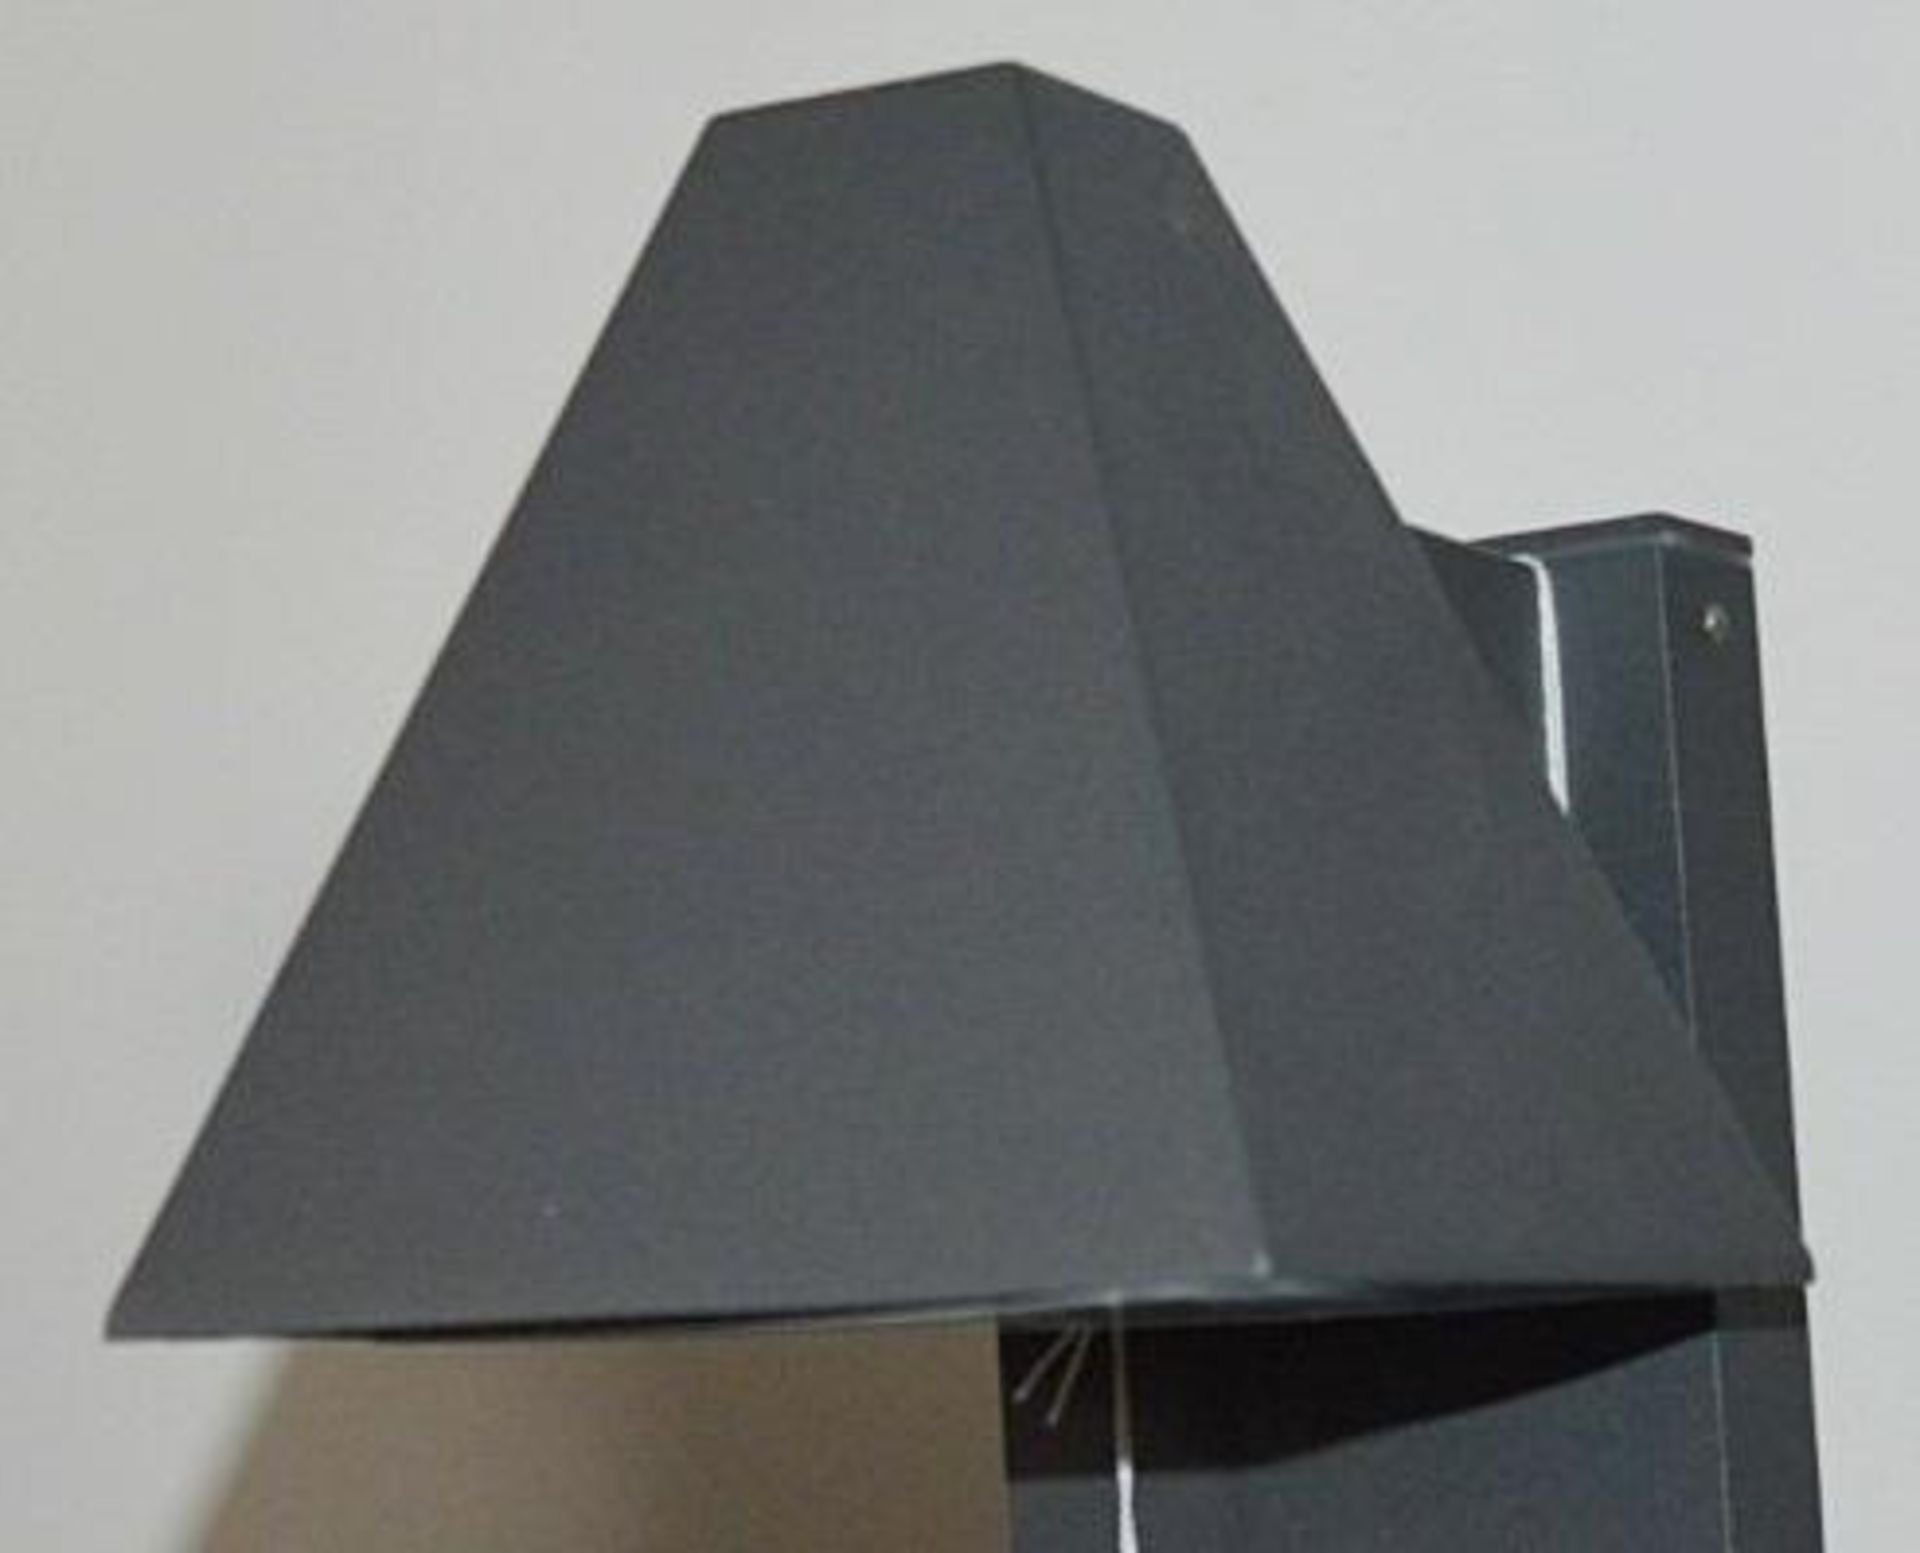 1 x 80cm Pyramid Outdoor Wall Light - Ex Display Stock - CL298 - Ref: J230 - Location: - Image 2 of 3